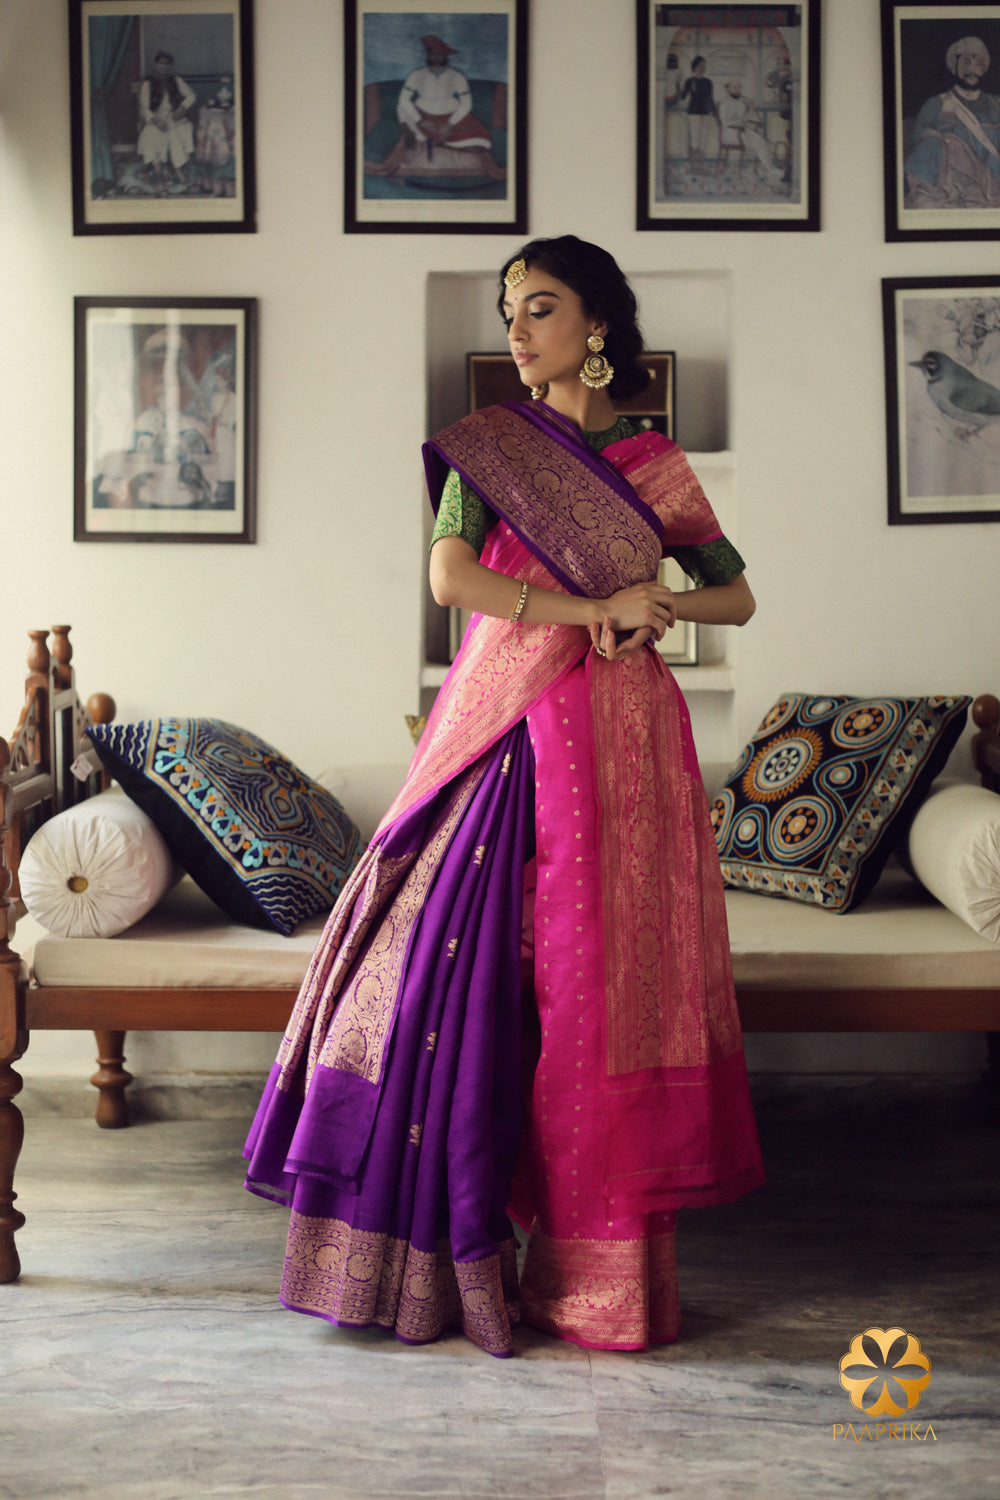 Regal Purple Handwoven Spun Silk Saree with Intricate Gold Border, embodying timeless elegance in every thread.